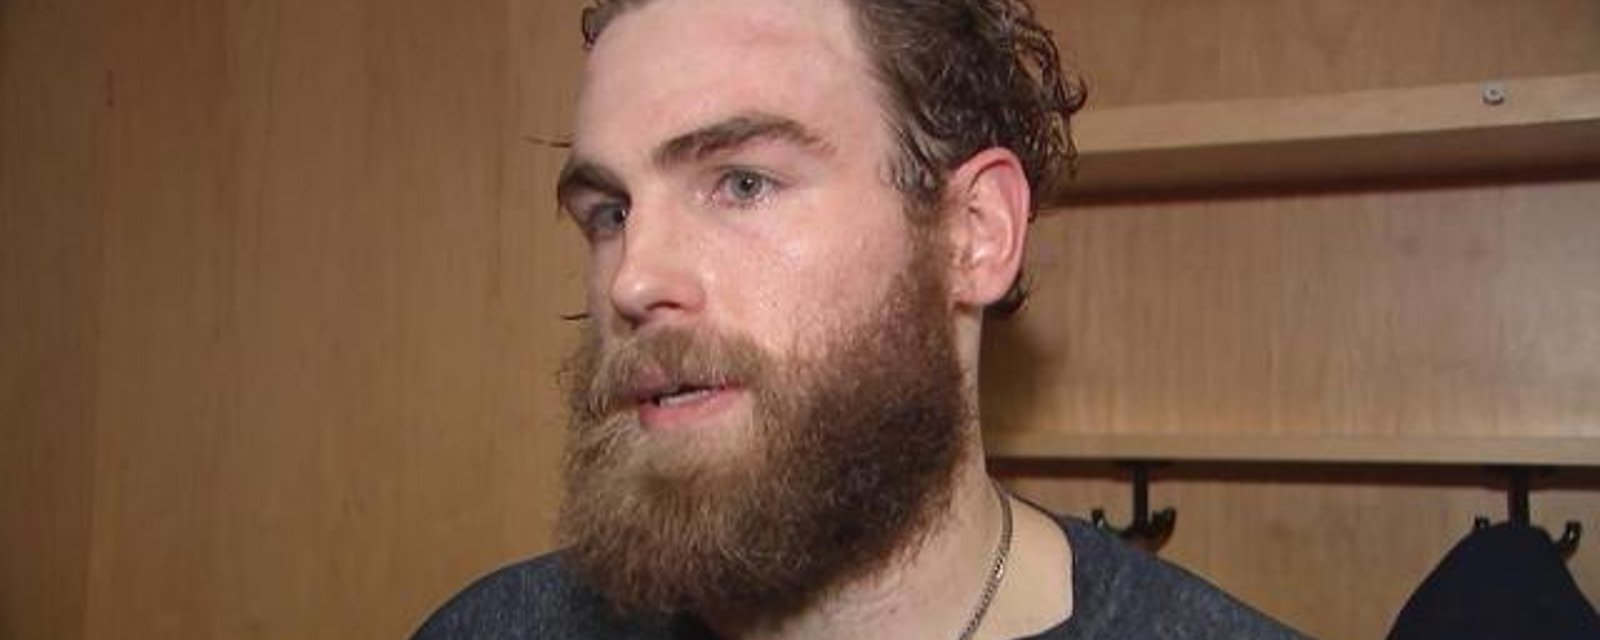 Ryan O’Reilly elaborates on why he left Toronto, blames fans and media 